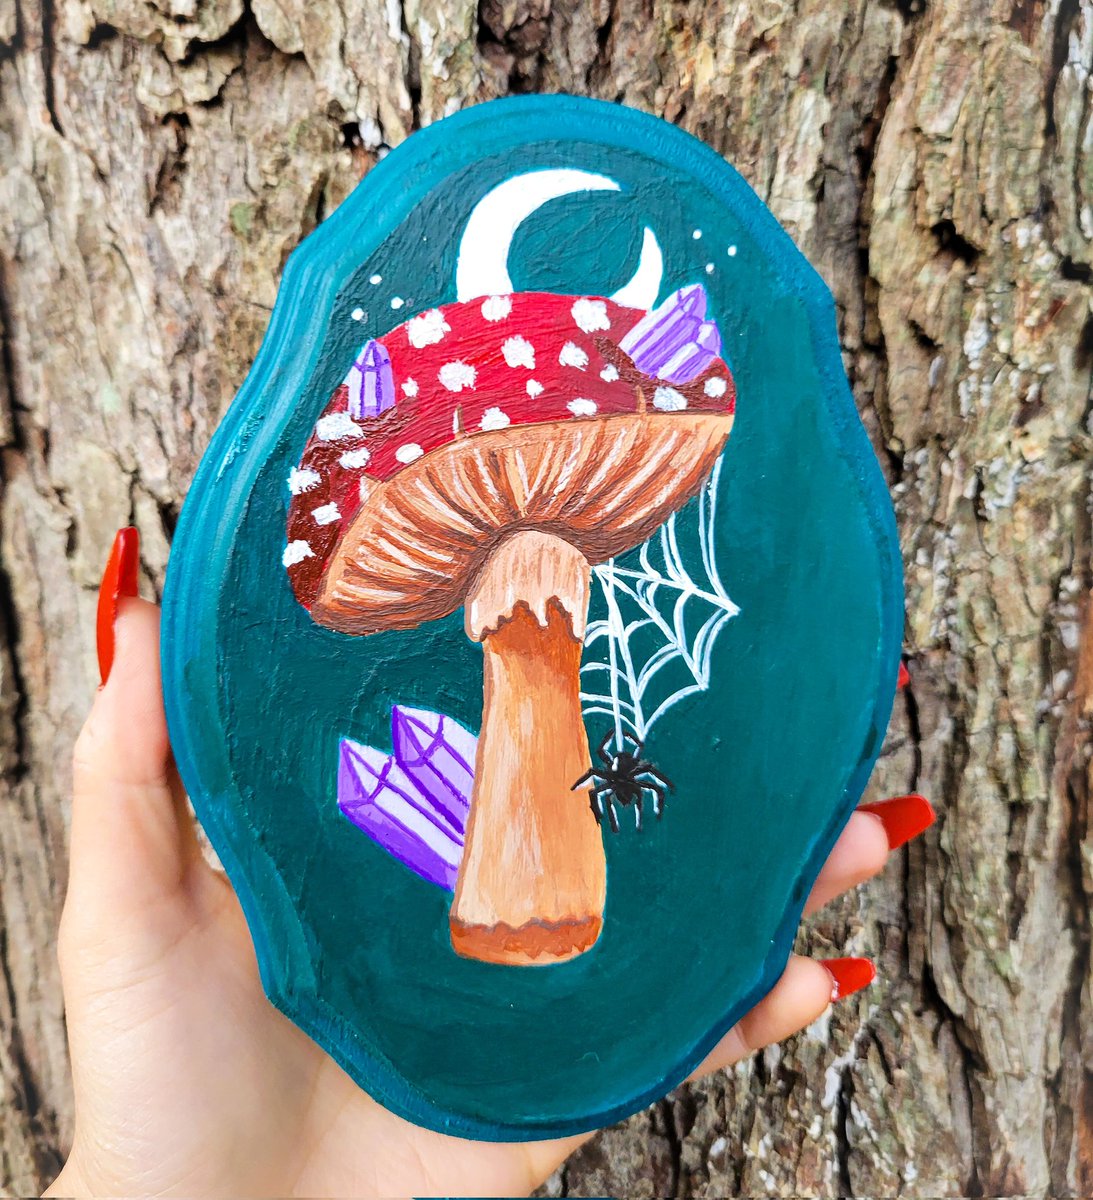 Finally posted something new on my art page. 🍄🕸 (IG: creepycuteart)